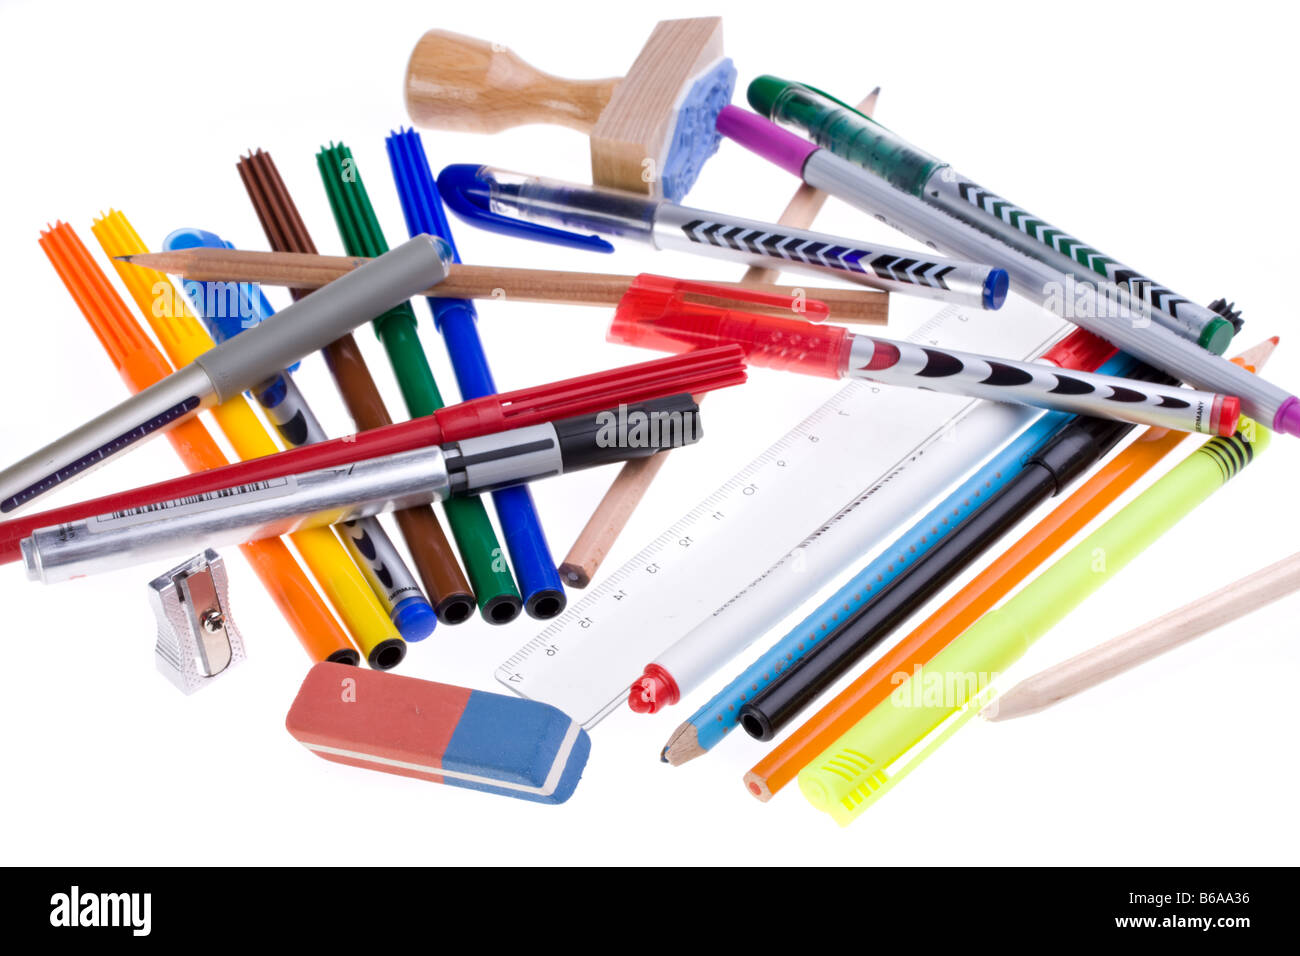 https://c8.alamy.com/comp/B6AA36/writing-utensils-pens-and-an-eraser-isolated-on-white-background-B6AA36.jpg